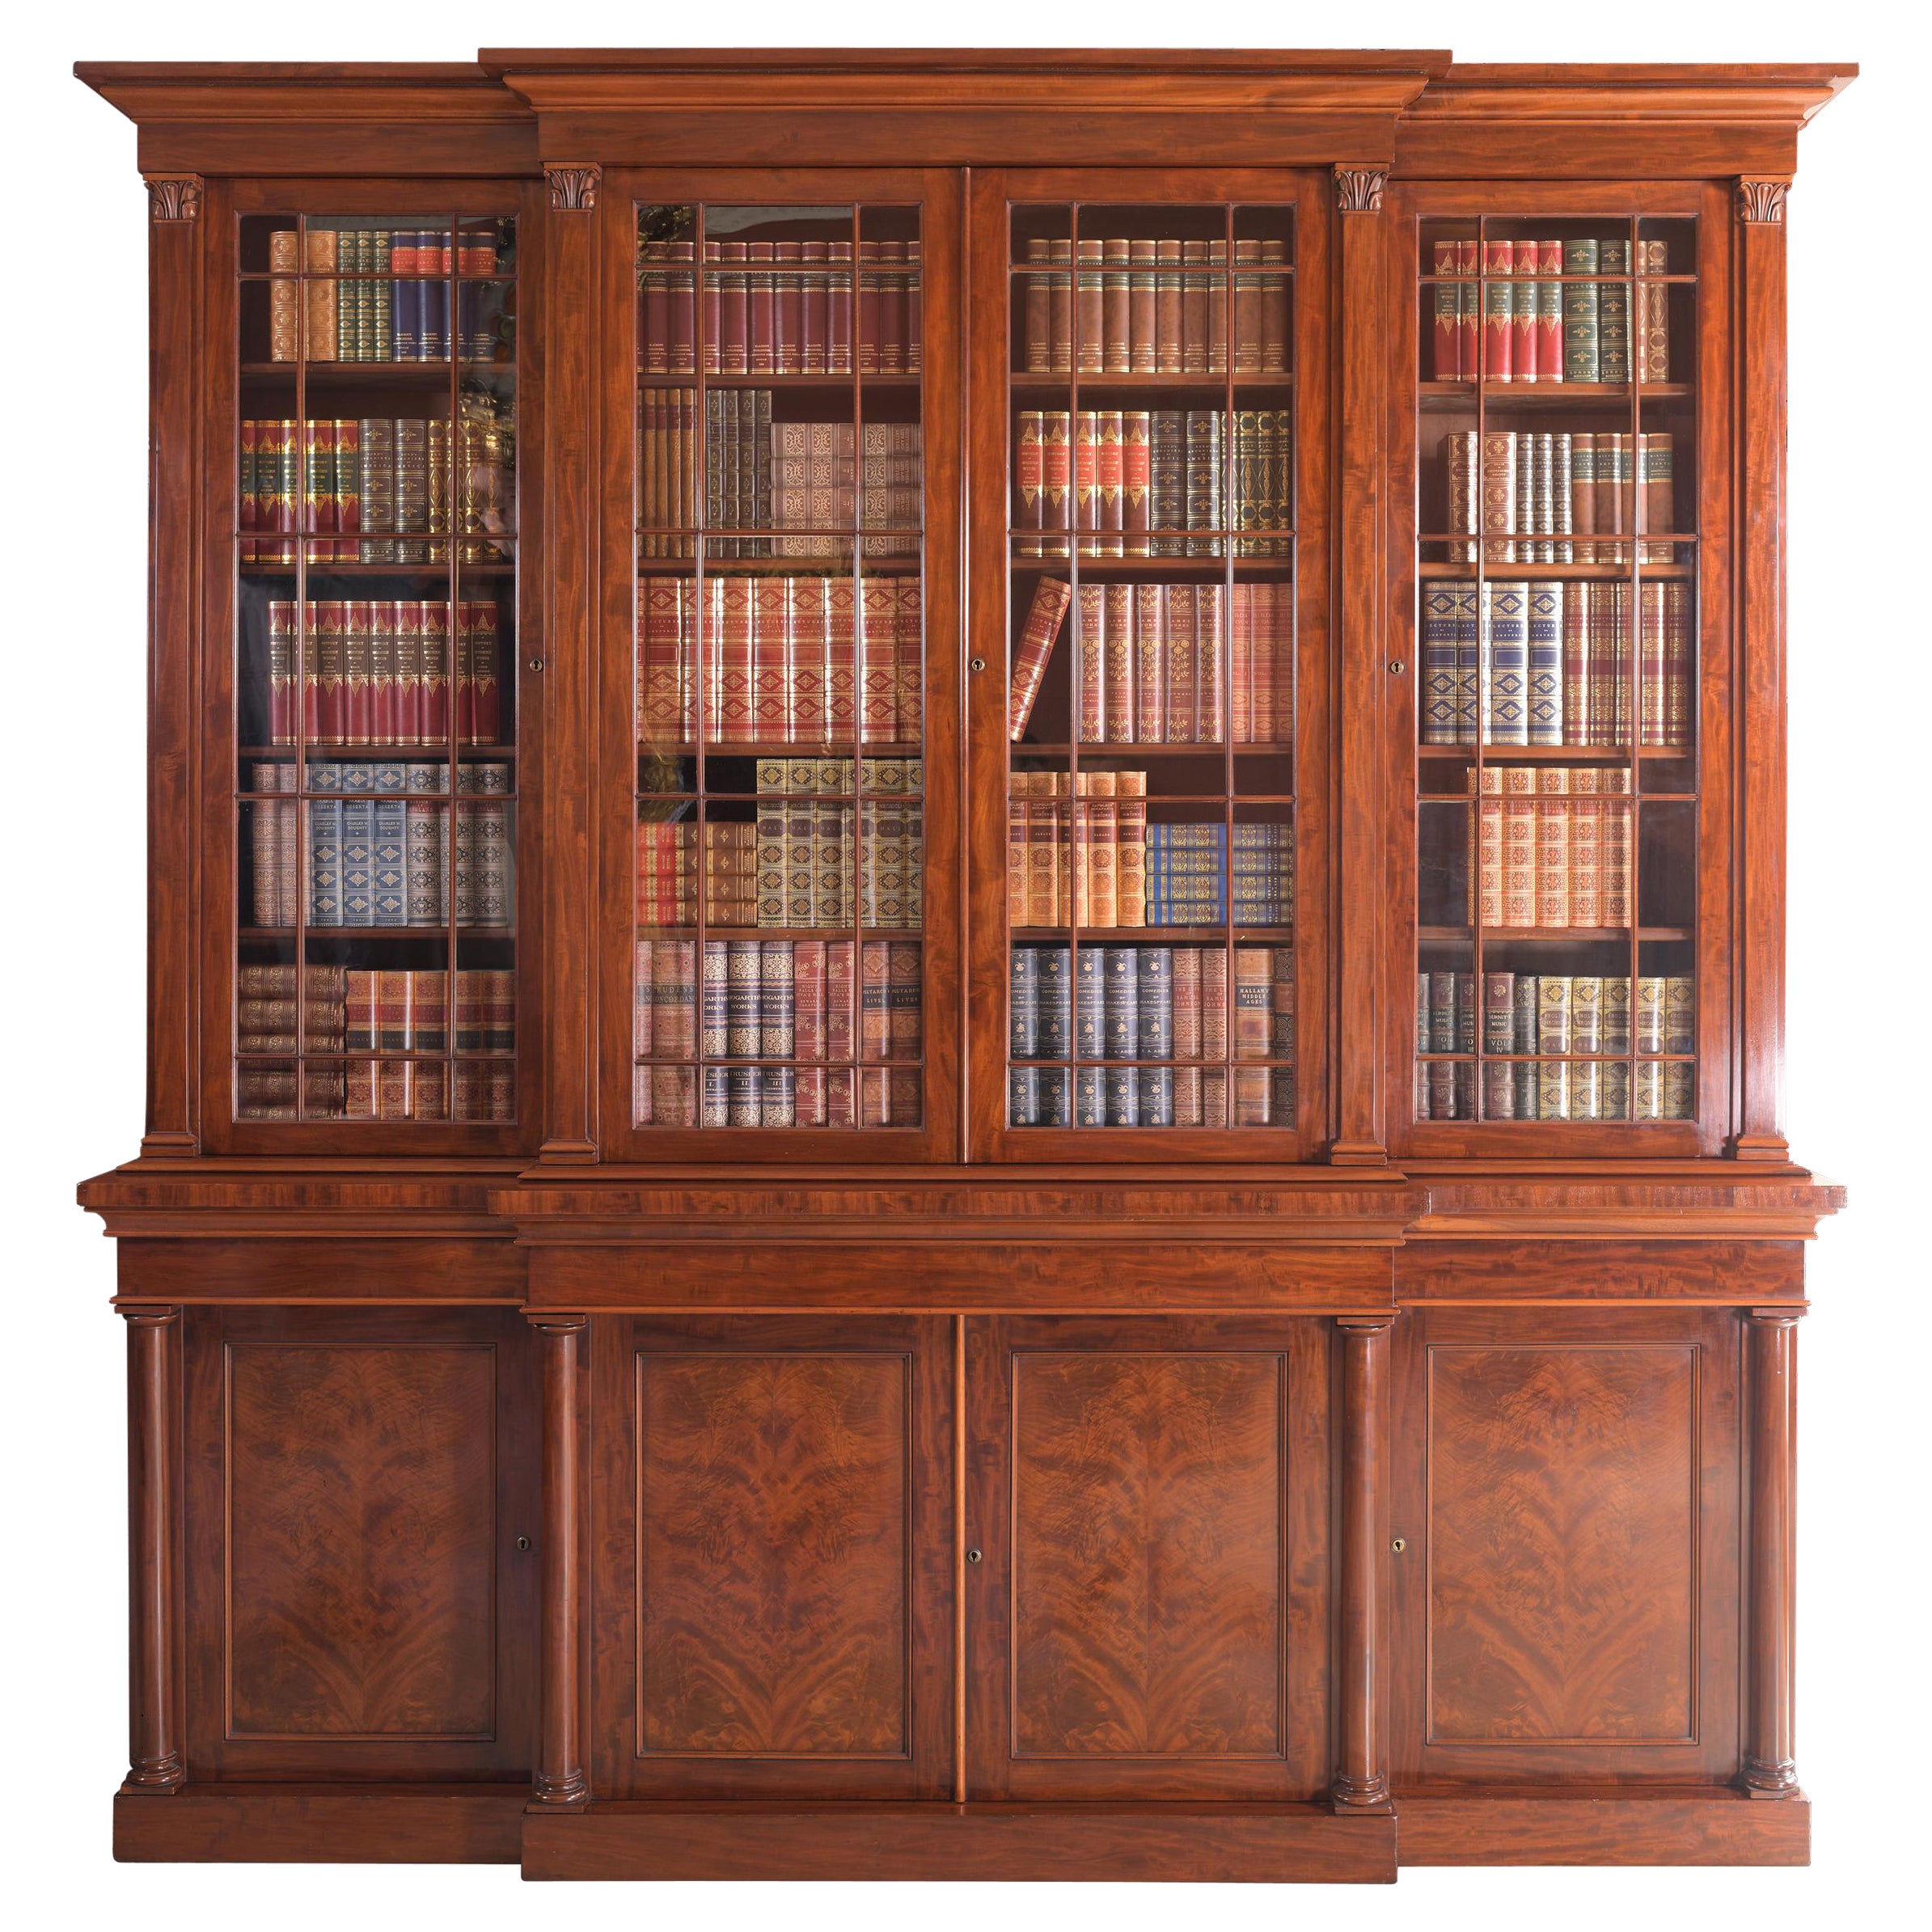 19th Century English Regency Breakfront Bookcase Attributed to Gillows Lancaster